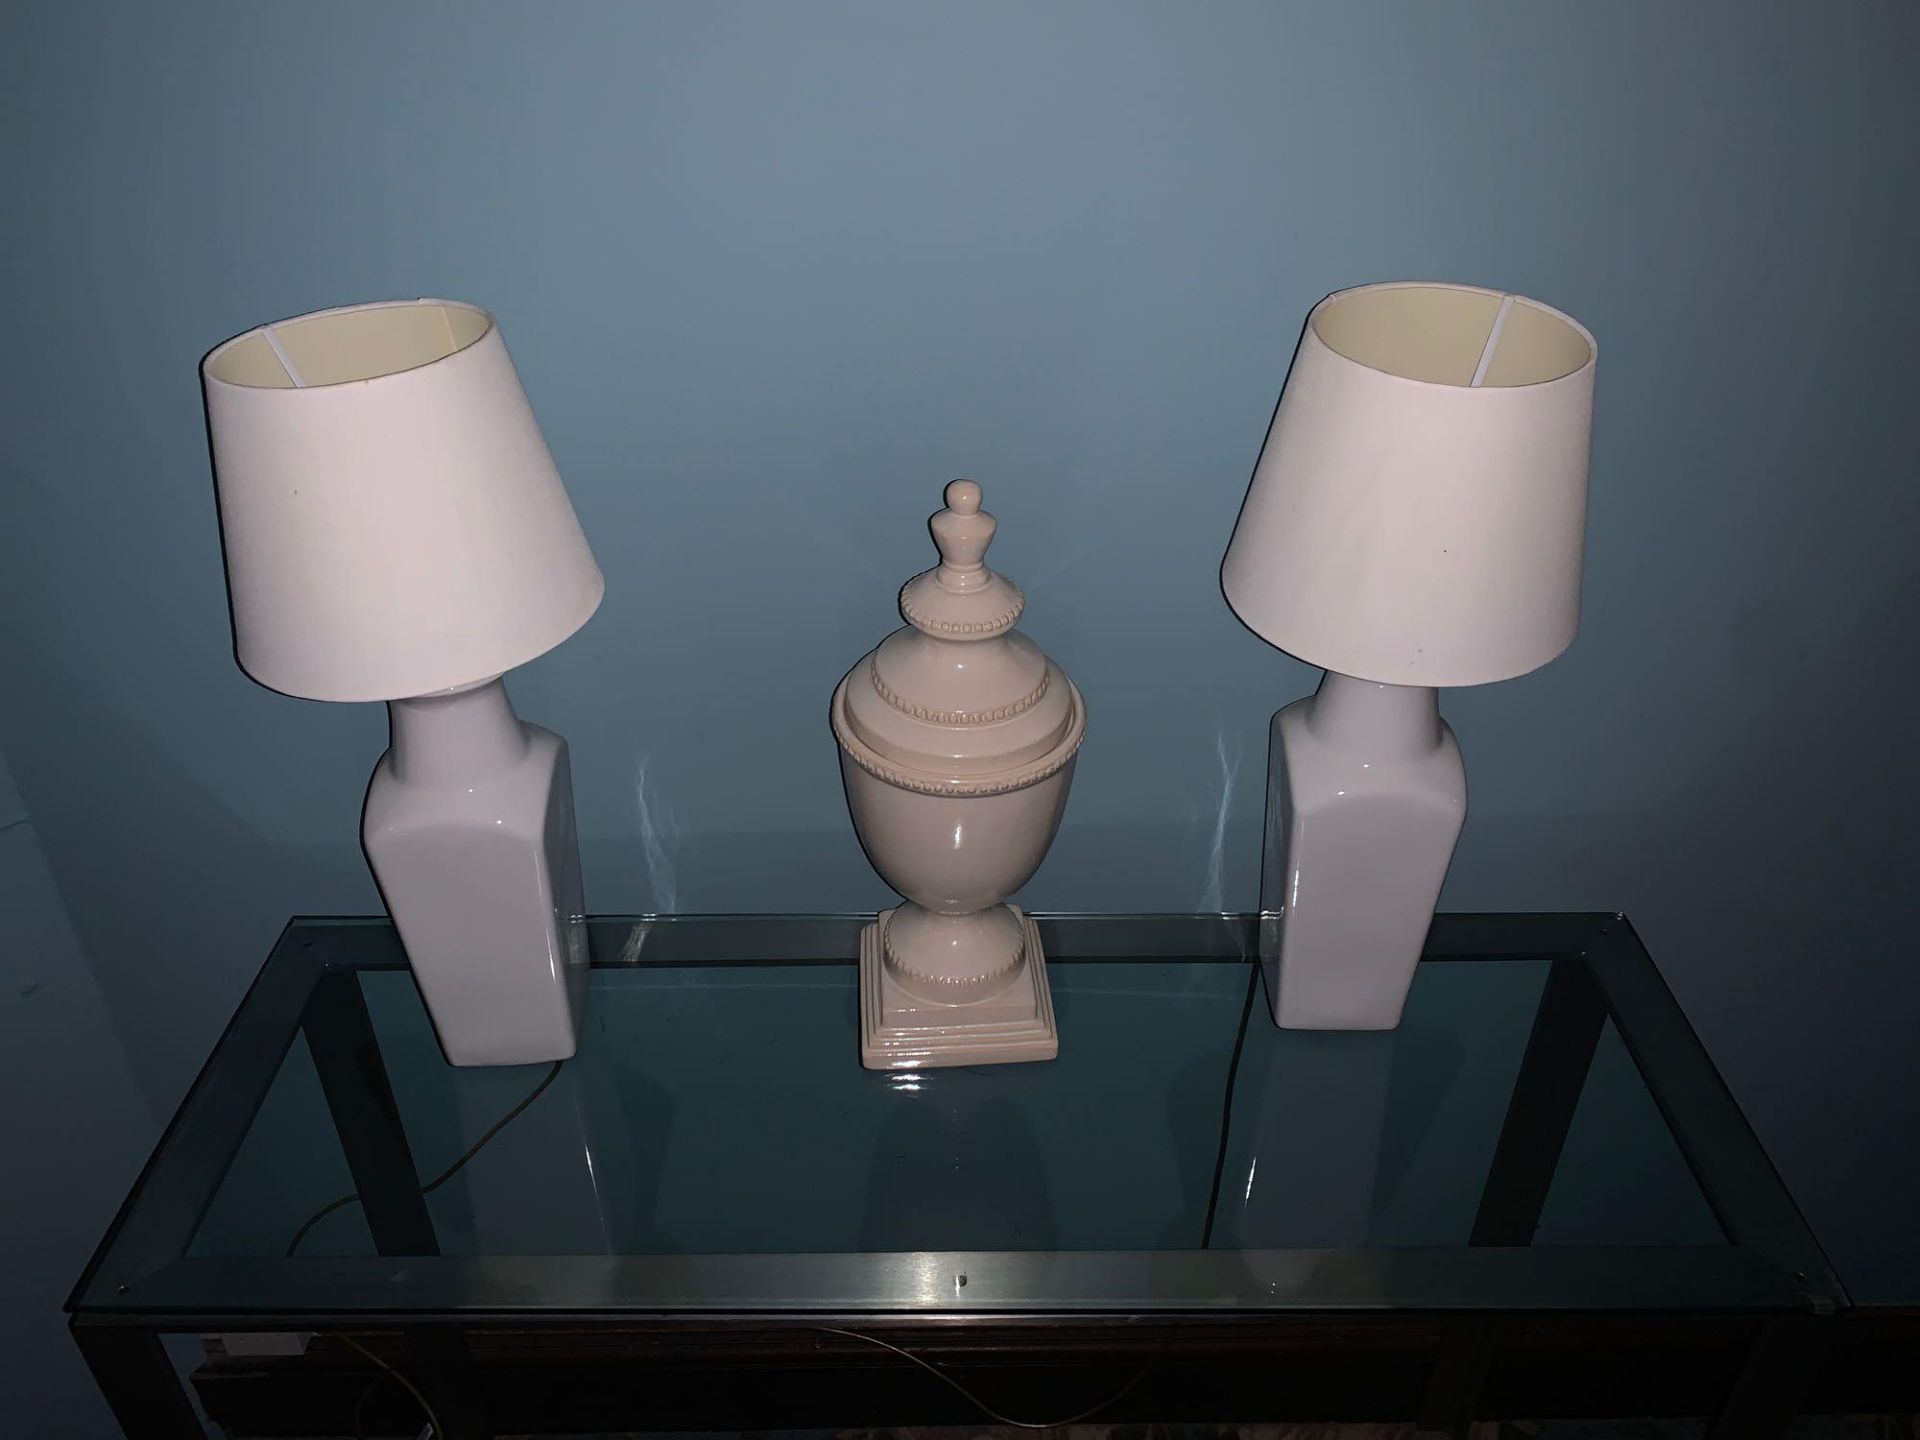 A Pair Of White Ceramic Table Lamps And A Ceramic Urn 60cm - Image 2 of 2